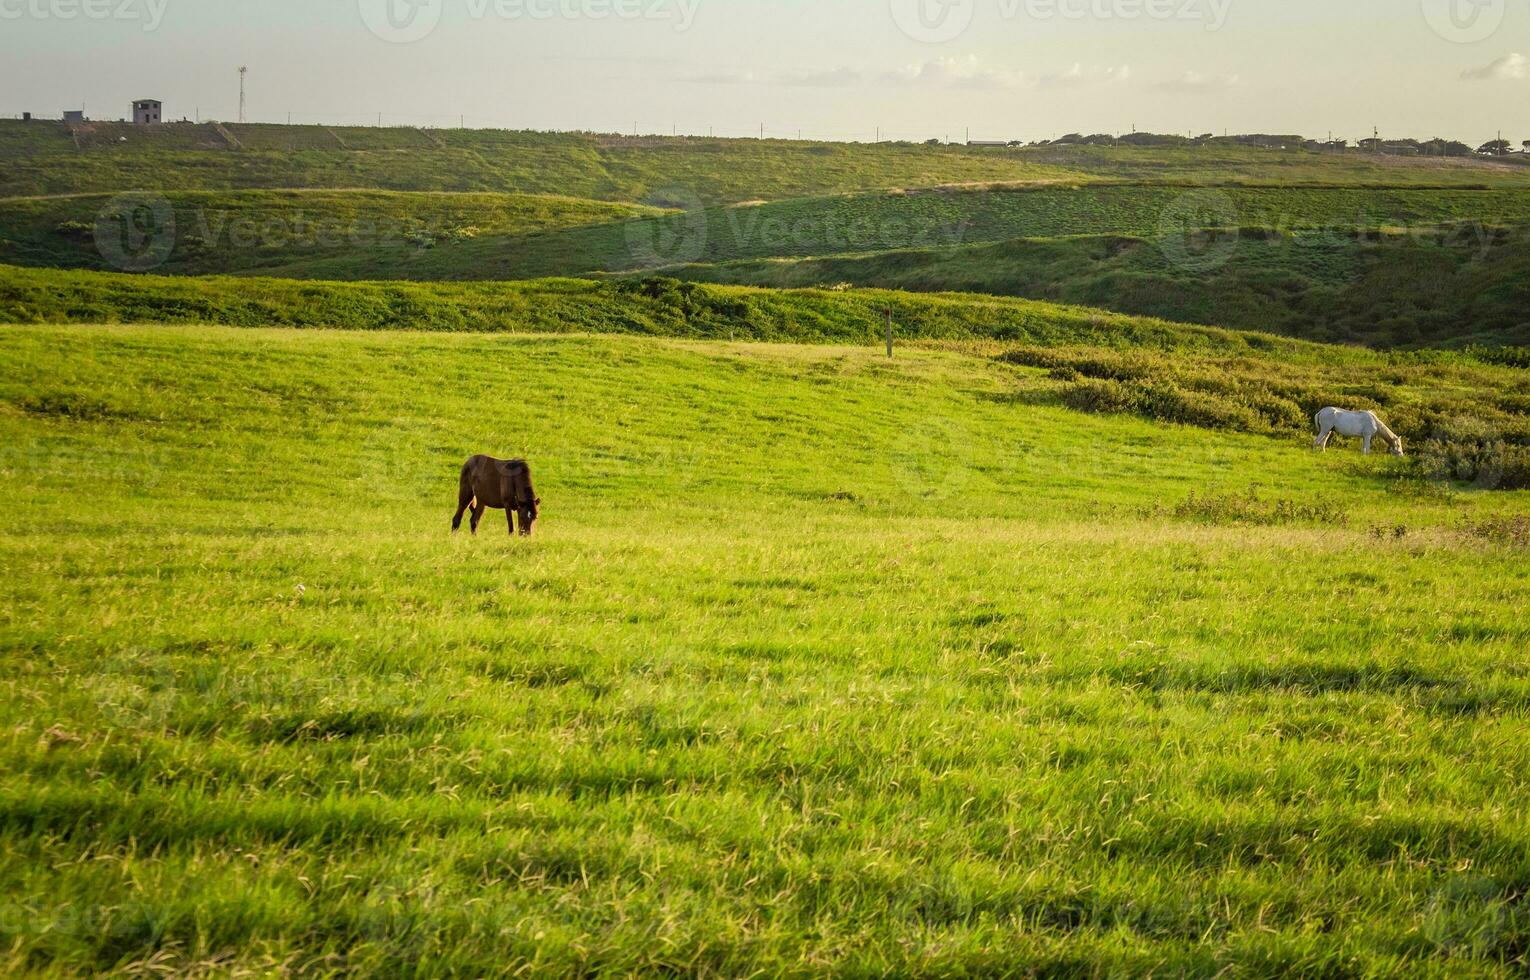 Two horses eating grass together in the field, hill with two horses eating grass, two horses in a meadow photo